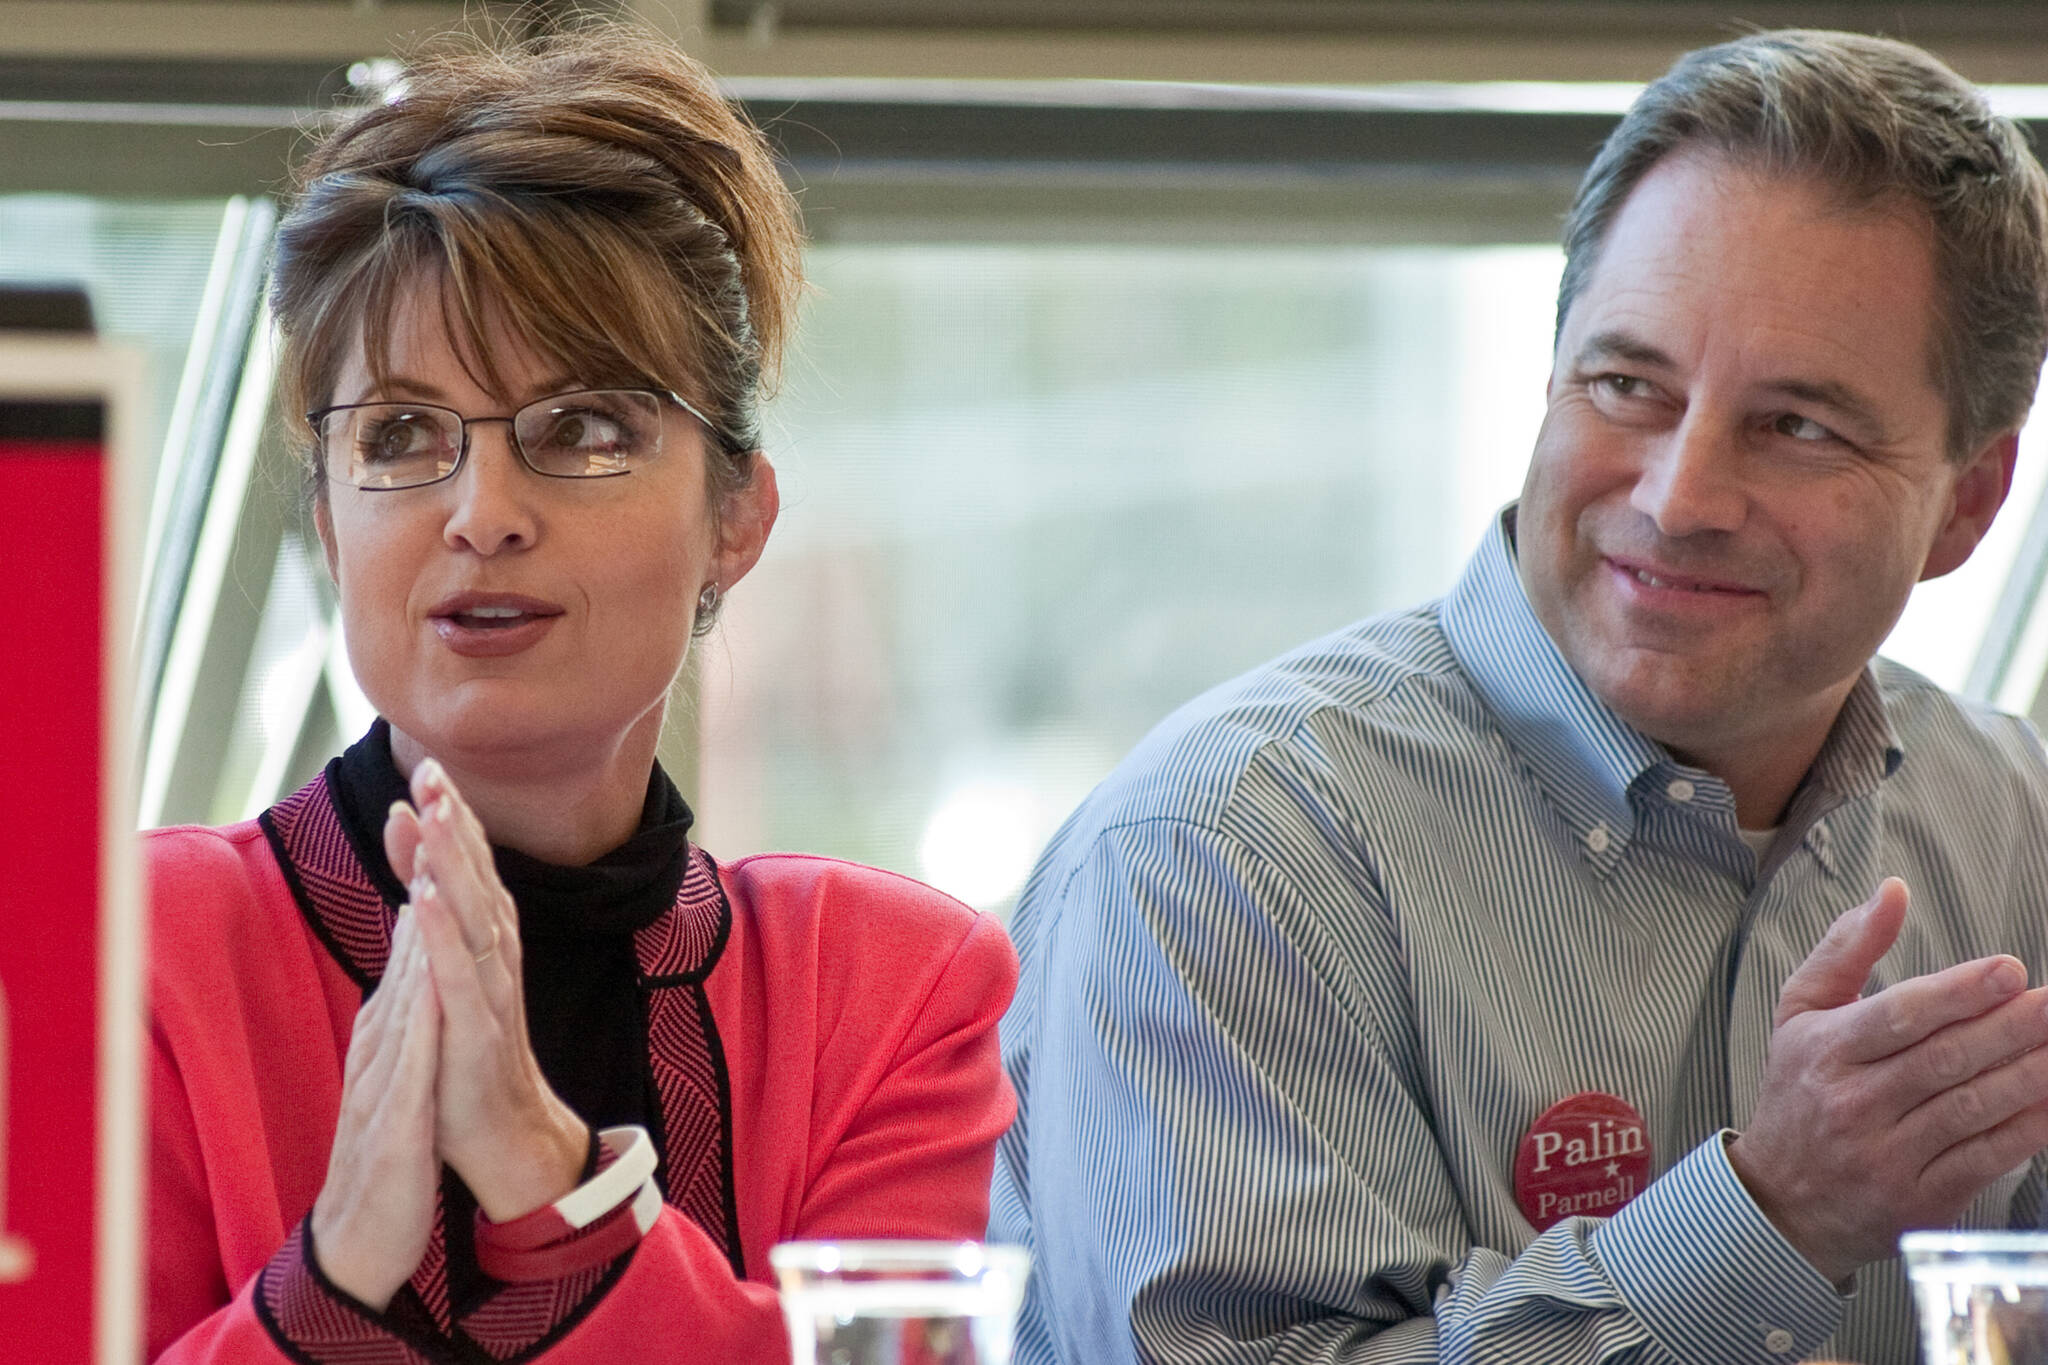 Then-candidate for governor Sarah Palin and running mate Sean Parnell listen to introductions during a Capital City Republican Women’s luncheon at the UAS Recreation Center in September 2006. Palin is now running for Congress and has been endorsed by former President Donald Trump. (Michael Penn / Juneau Empire File)